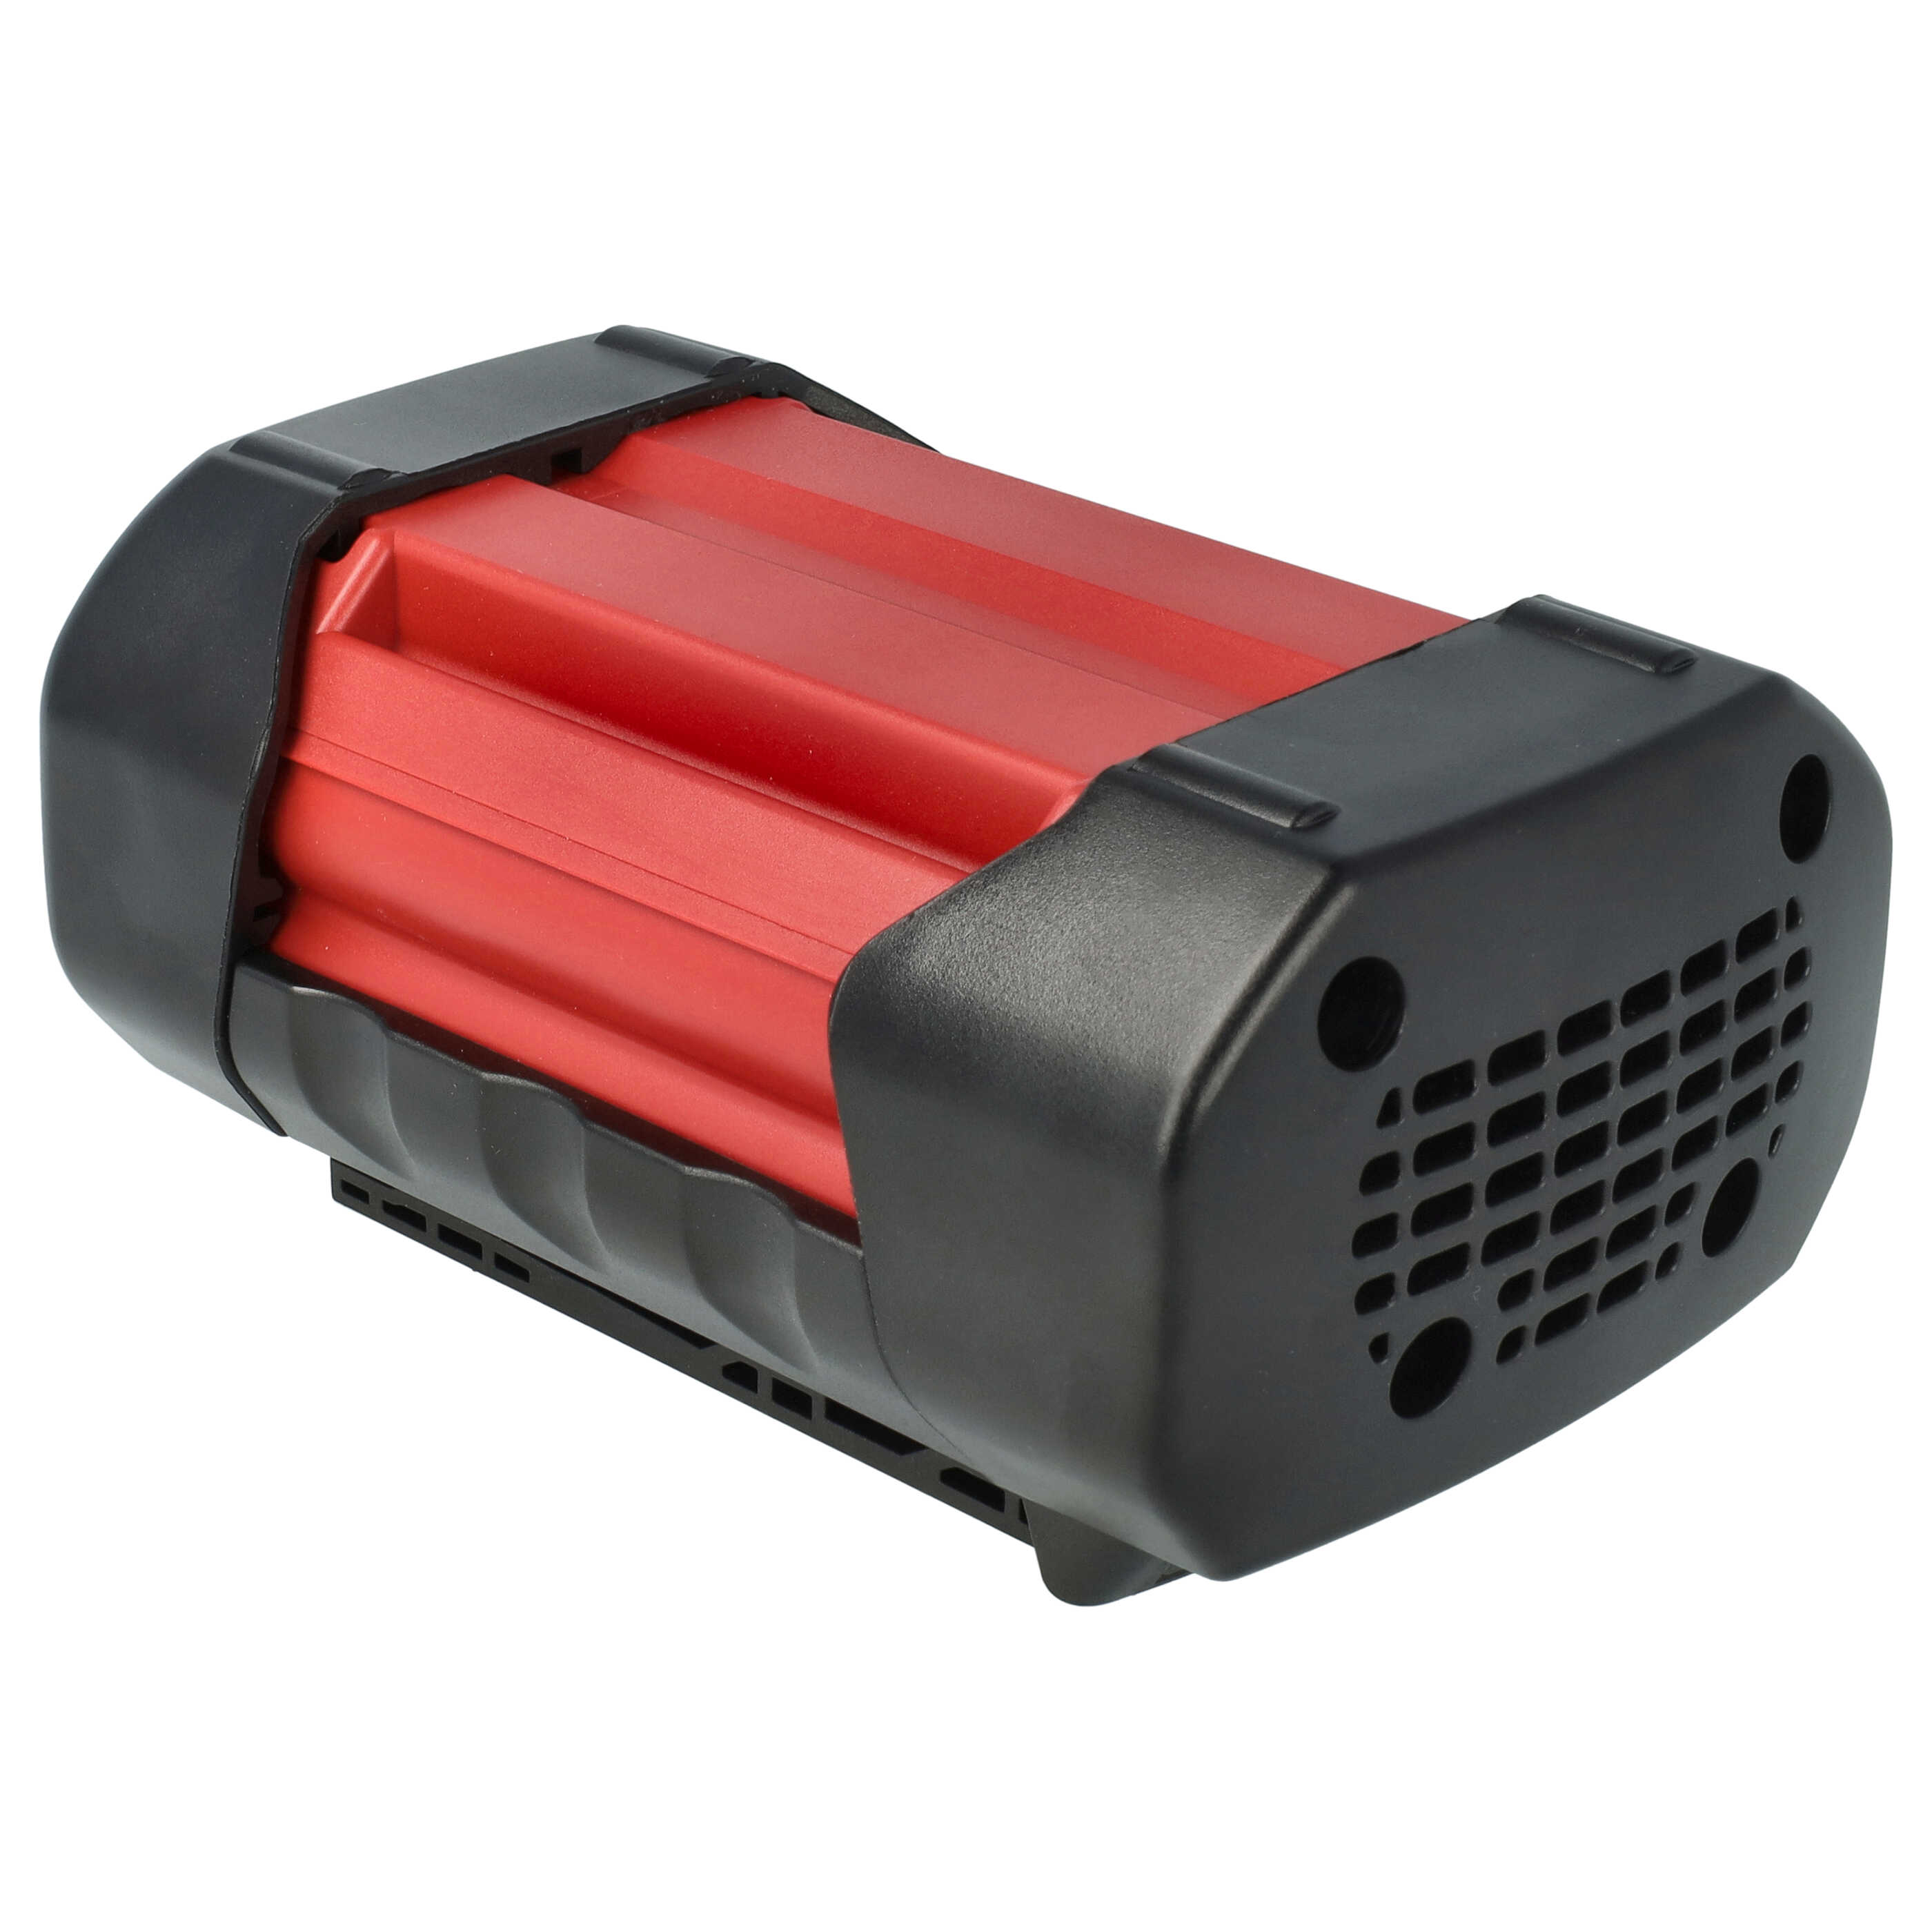 Lawnmower Battery Replacement for Bosch 2 607 336 173, 1600A0022N - 3000mAh 36V Li-Ion, black / red